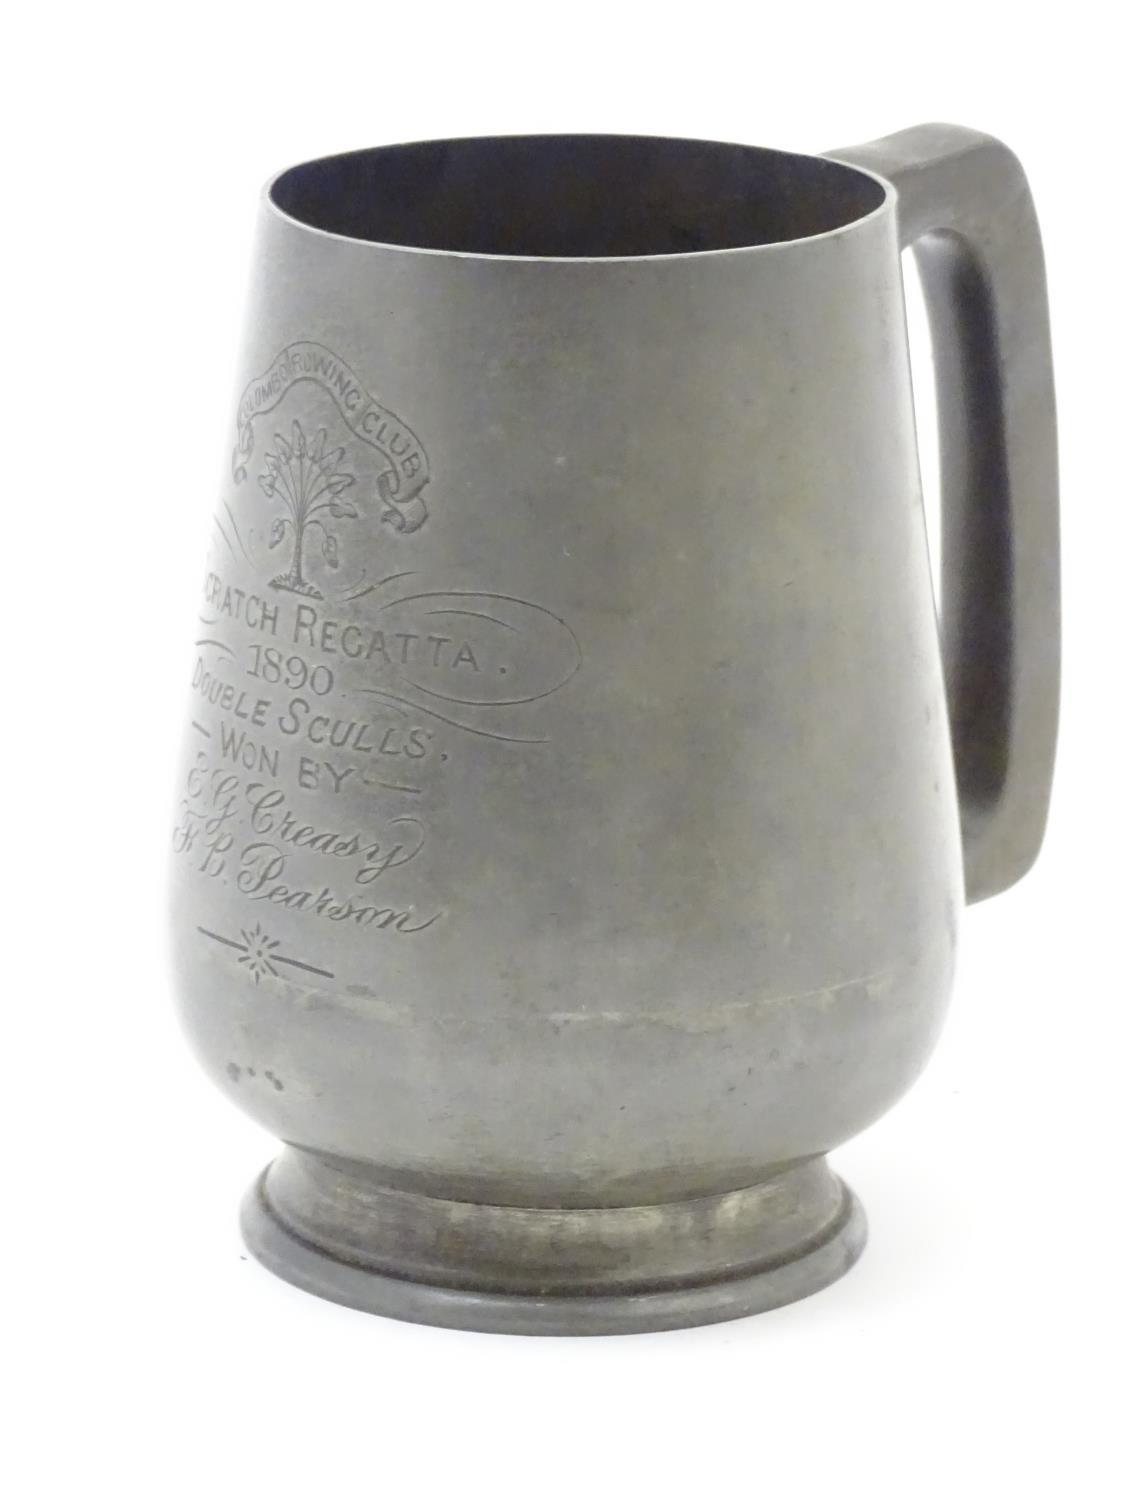 Rowing interest : A 19thC silver plate mug of tankard form engraved ' Colombo Rowing Club, Scratch - Image 3 of 6